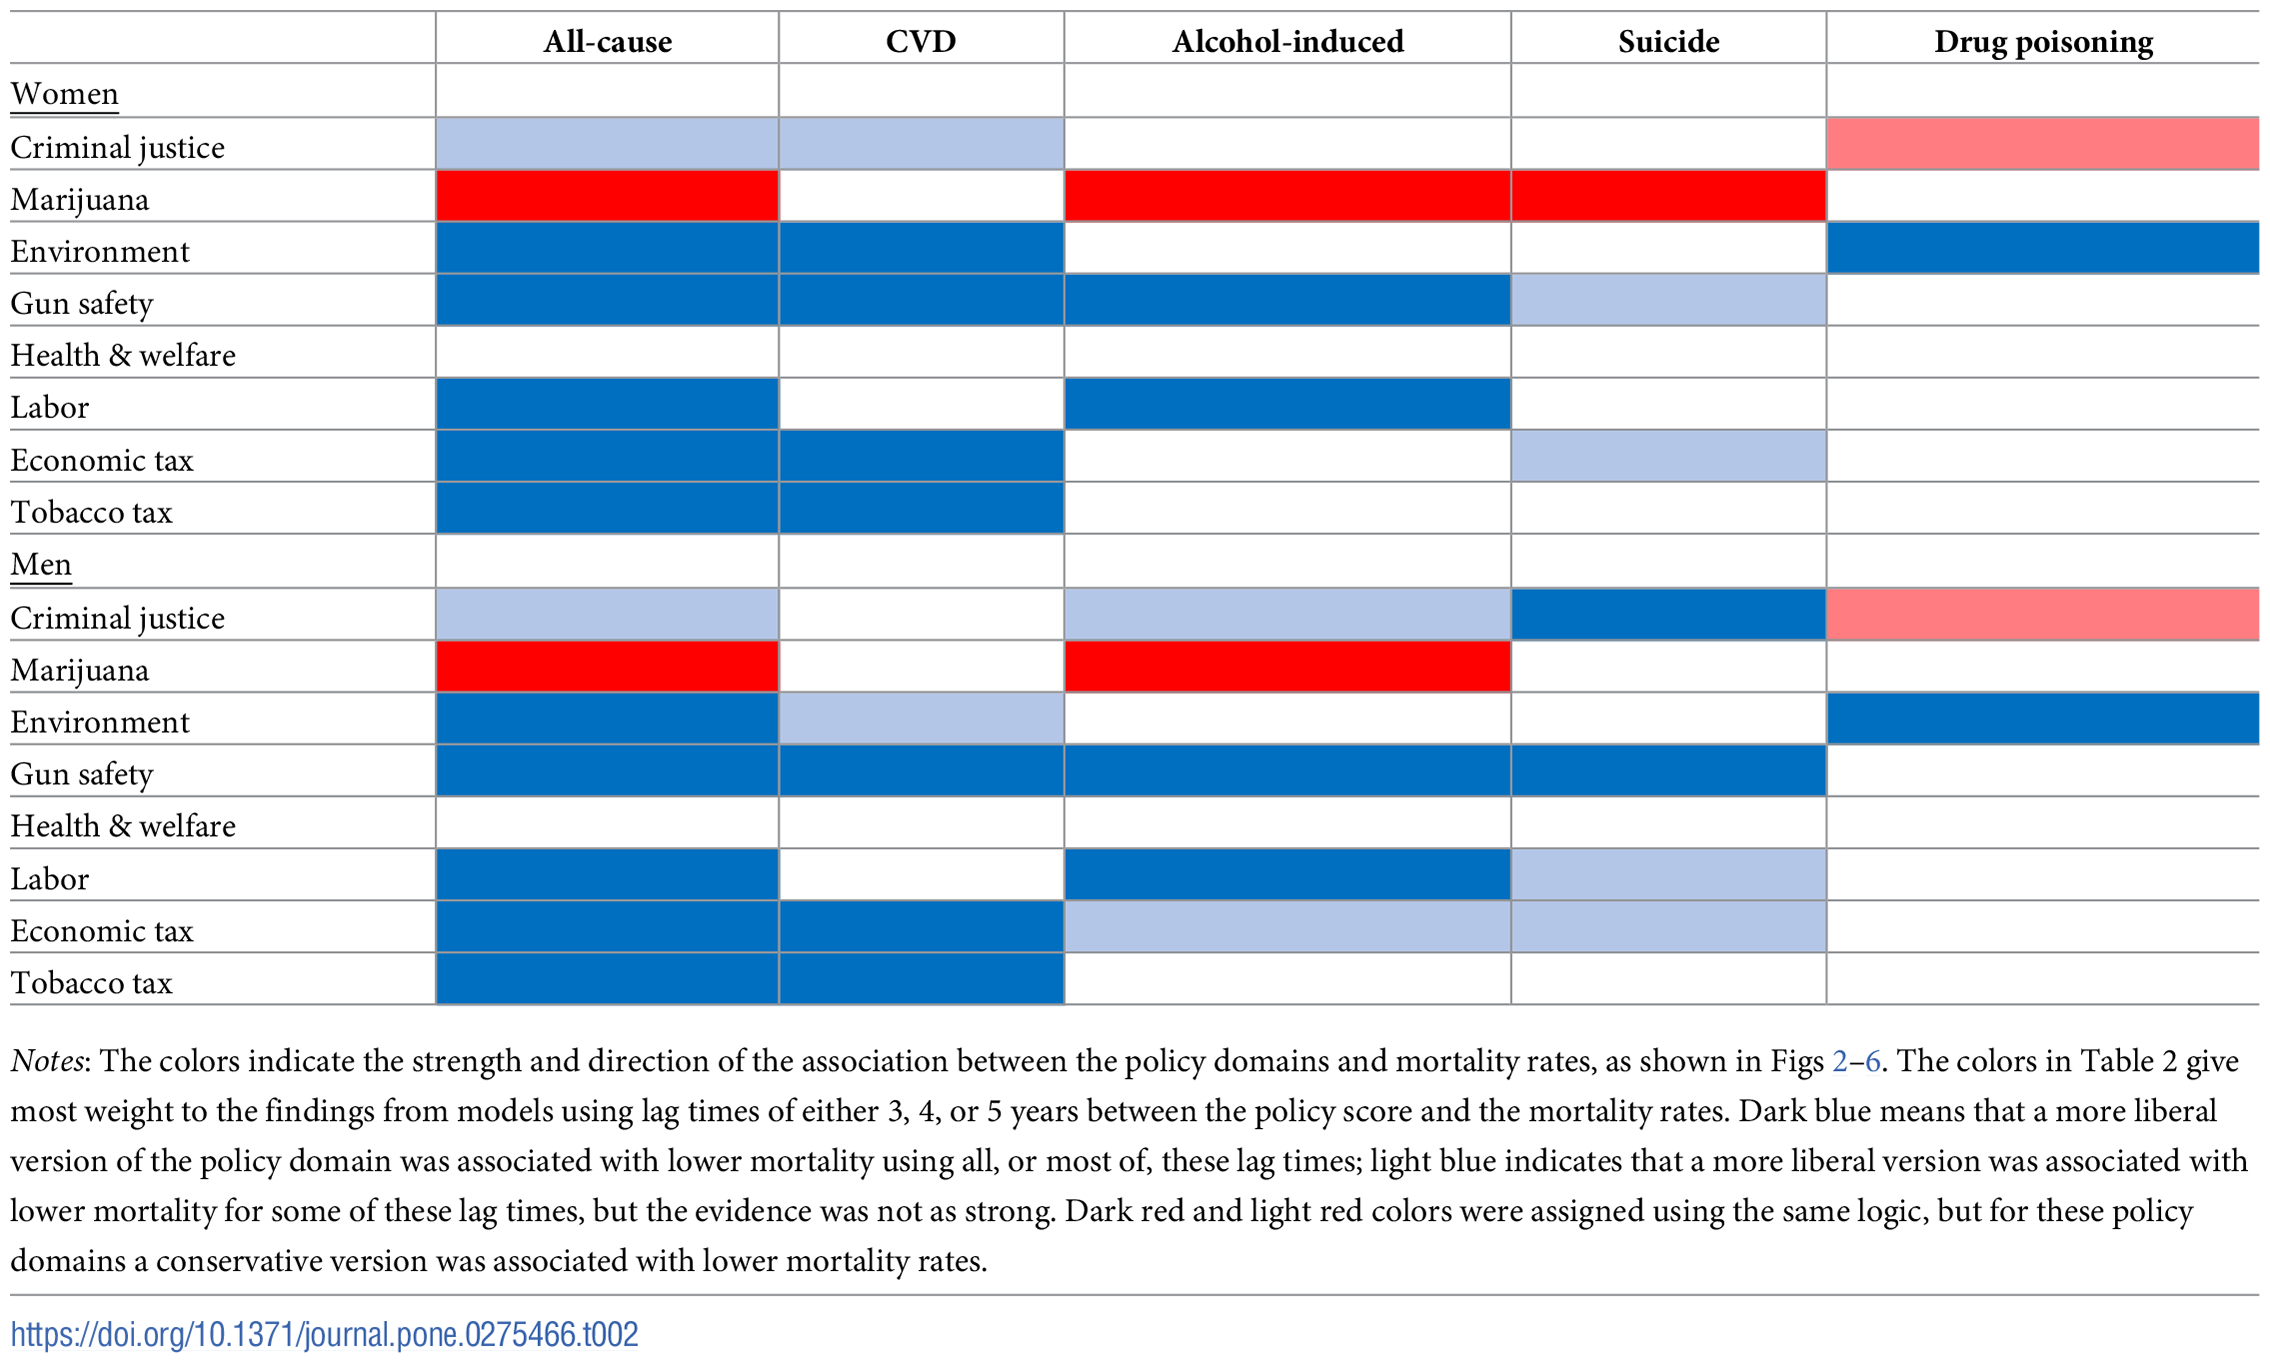 Summary of the strength and direction of the association between a policy domain’s liberalism score and working-age mortality rates. Graphic: Montez, et al., 2022 / PLOS ONE